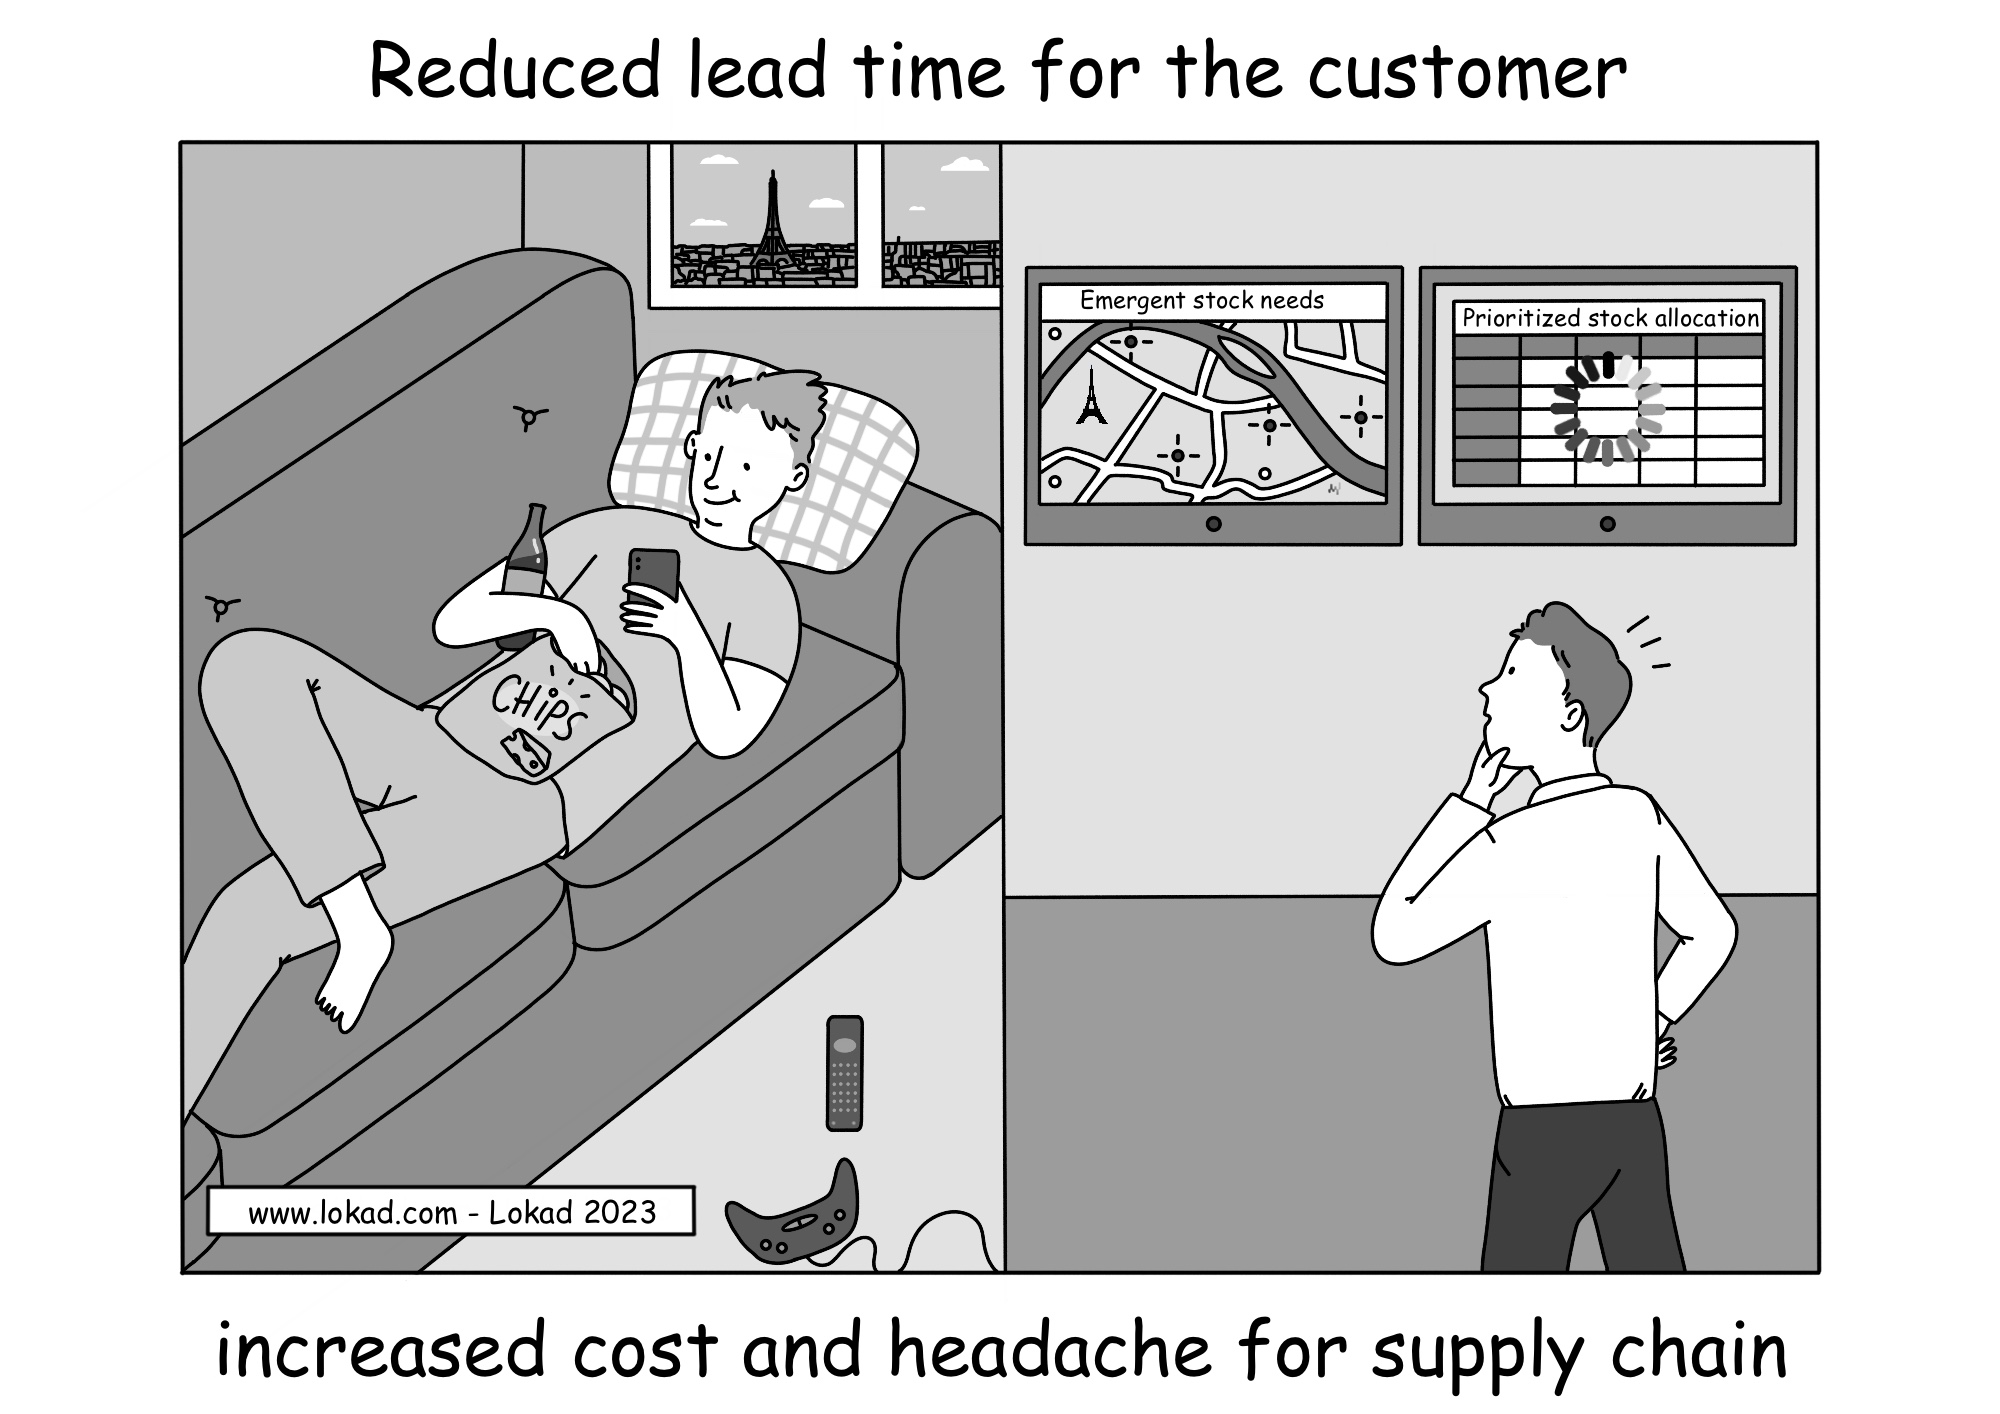 Reduced lead time for the customer